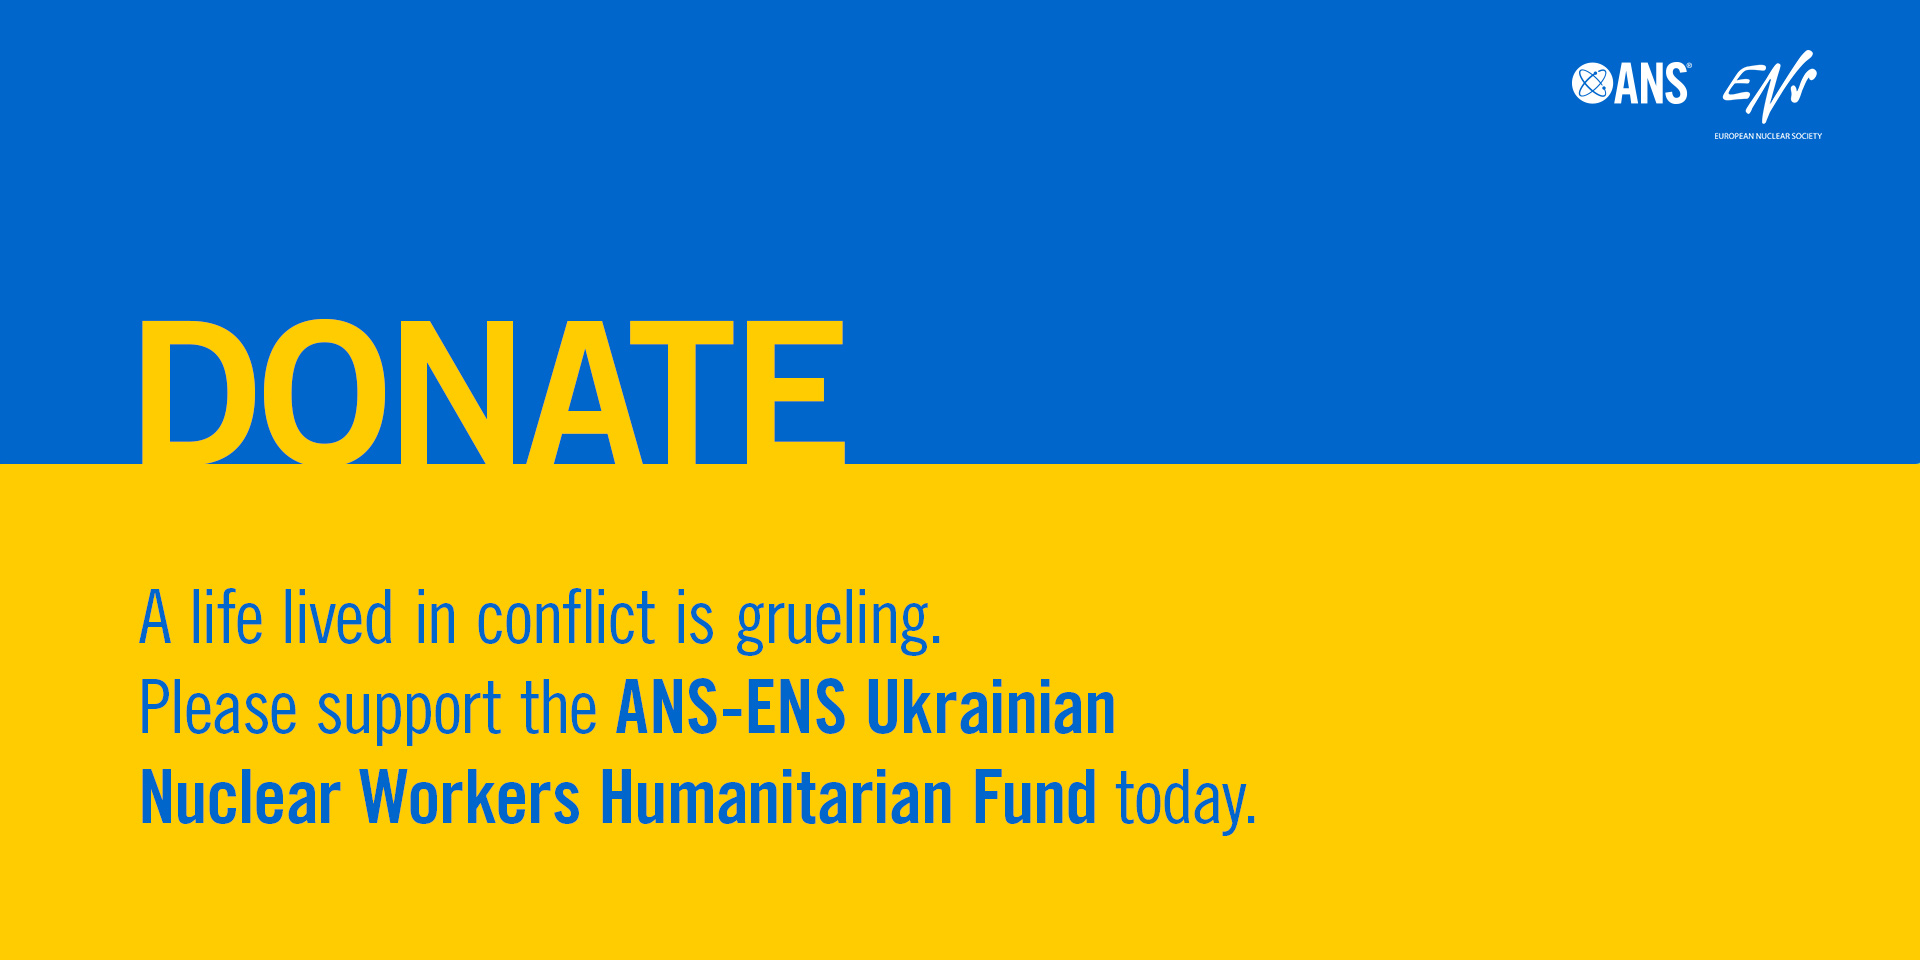 All donations go directly to the Ukraine Nuclear Society